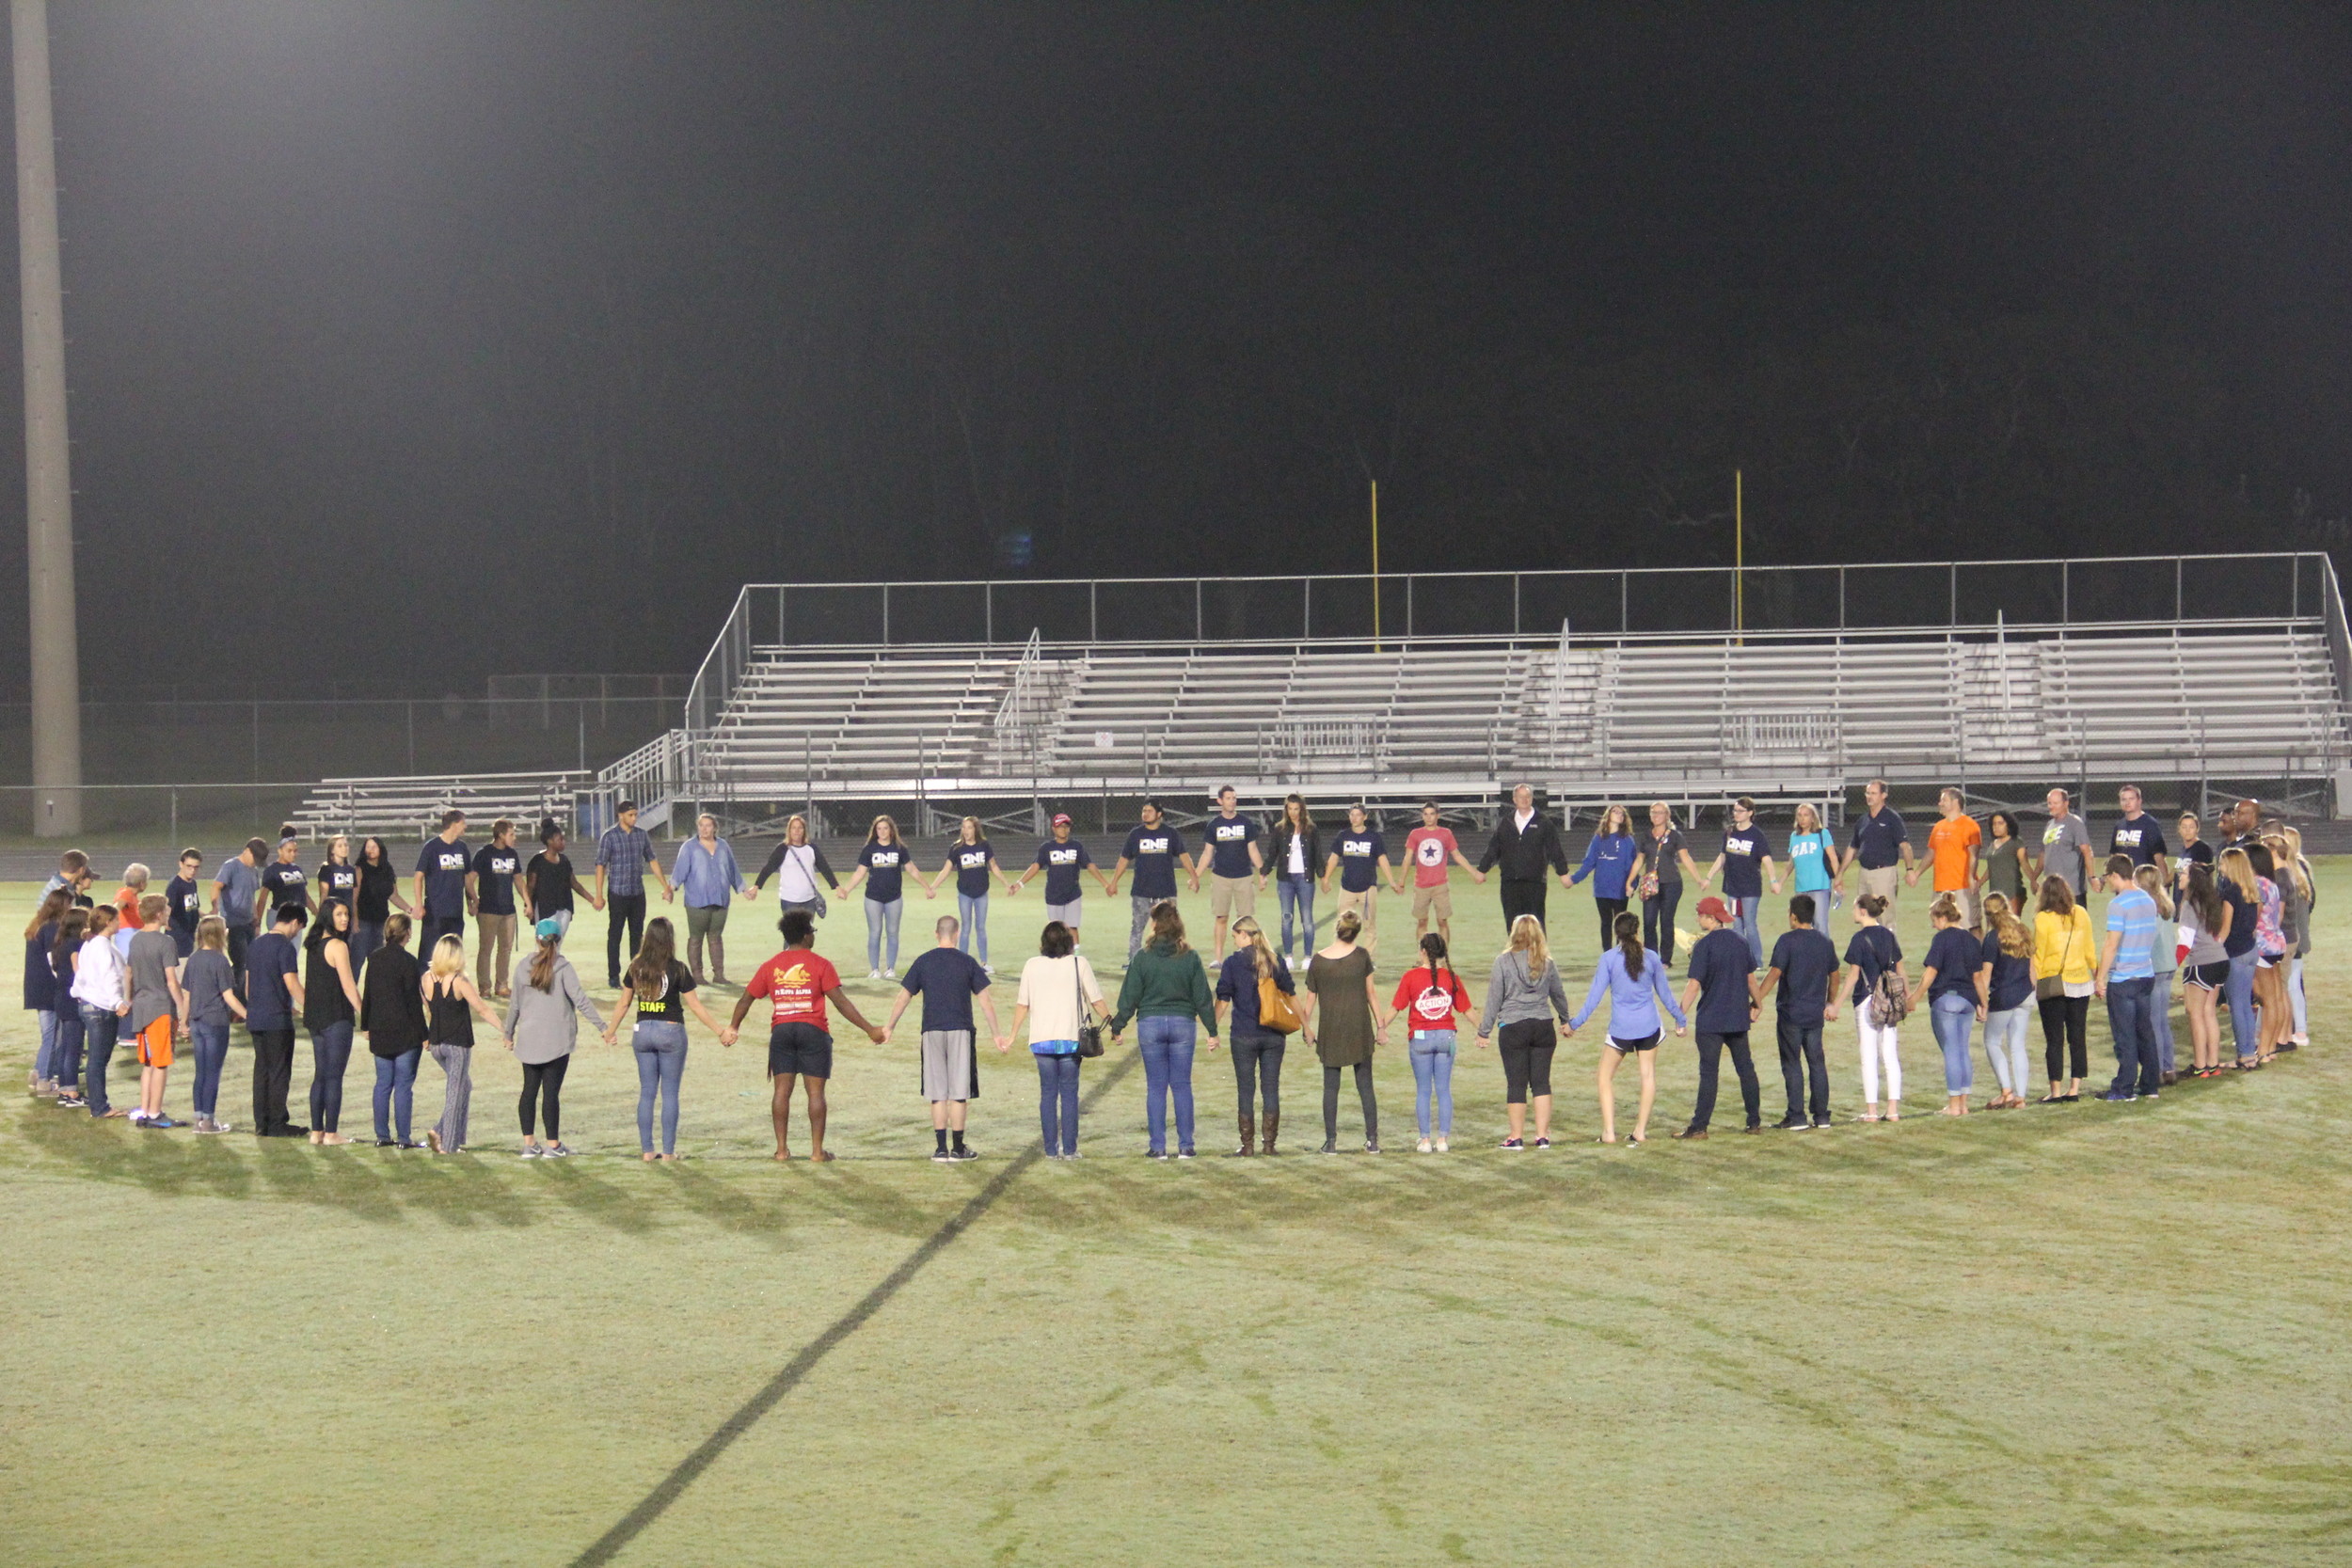 Fields of Faith participants gather in a circle center field to close the event in prayer.